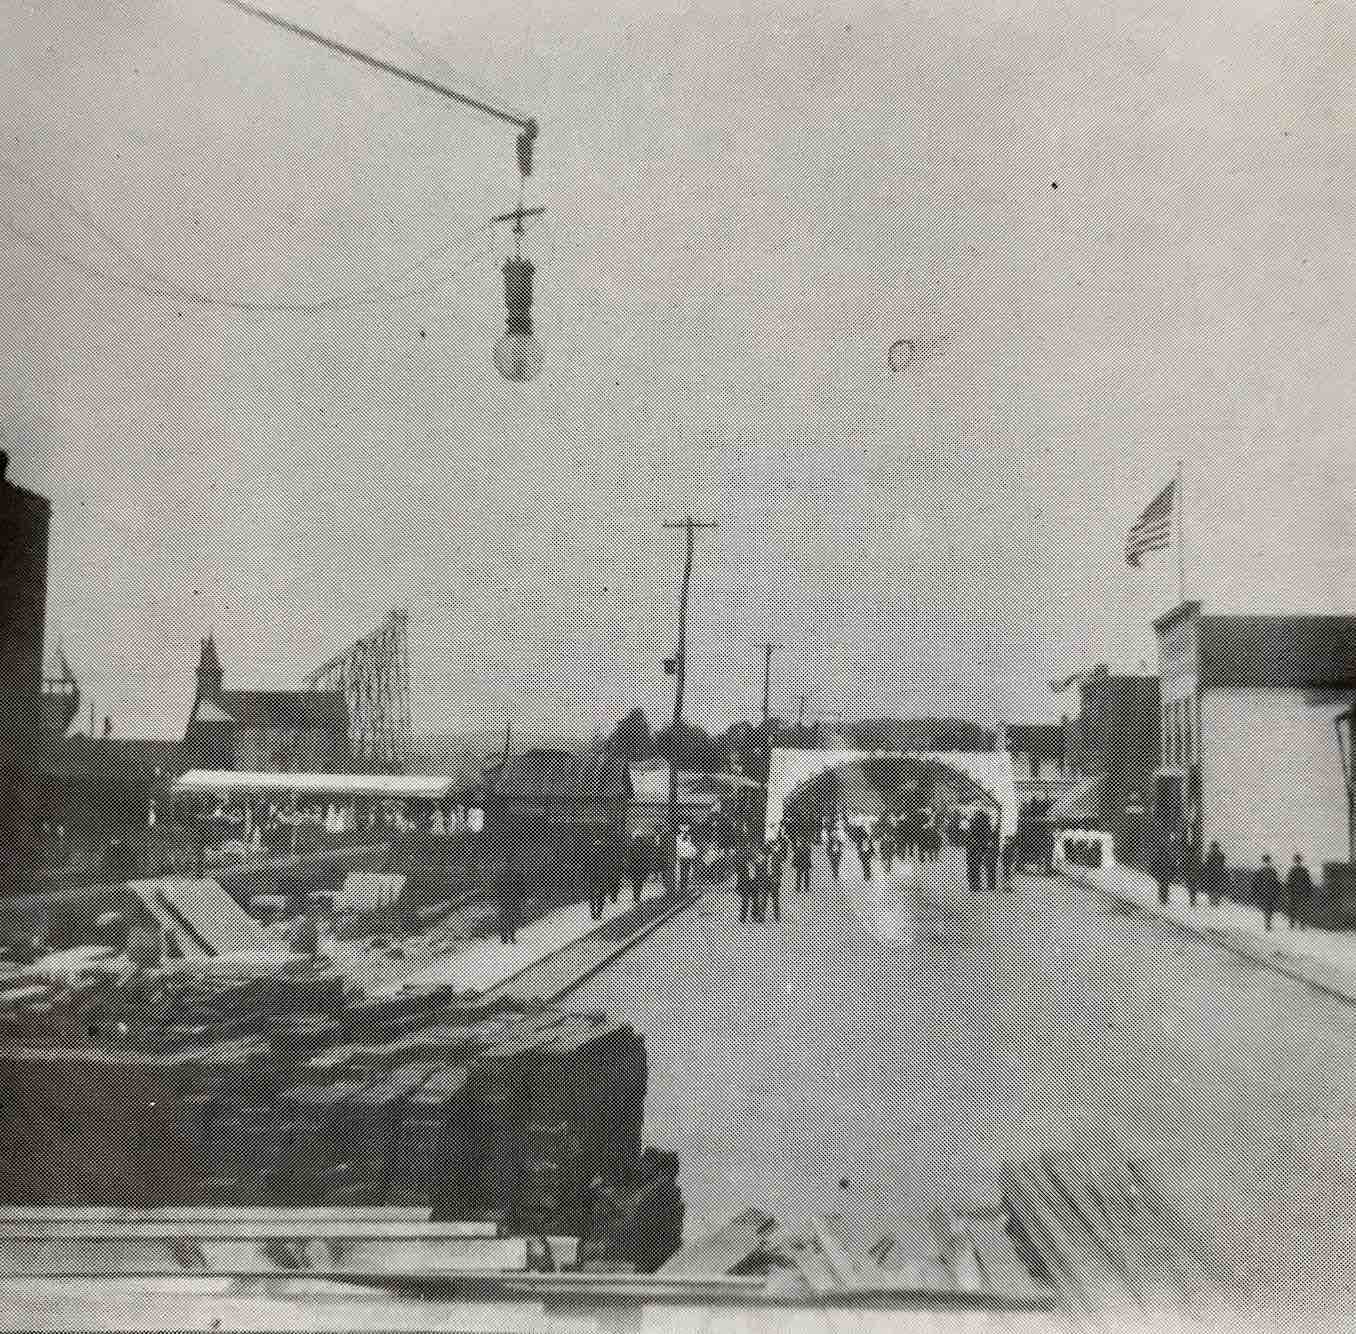 July 4th, 1905 Firemens’ Street Fair, showing the building under construction on the left.